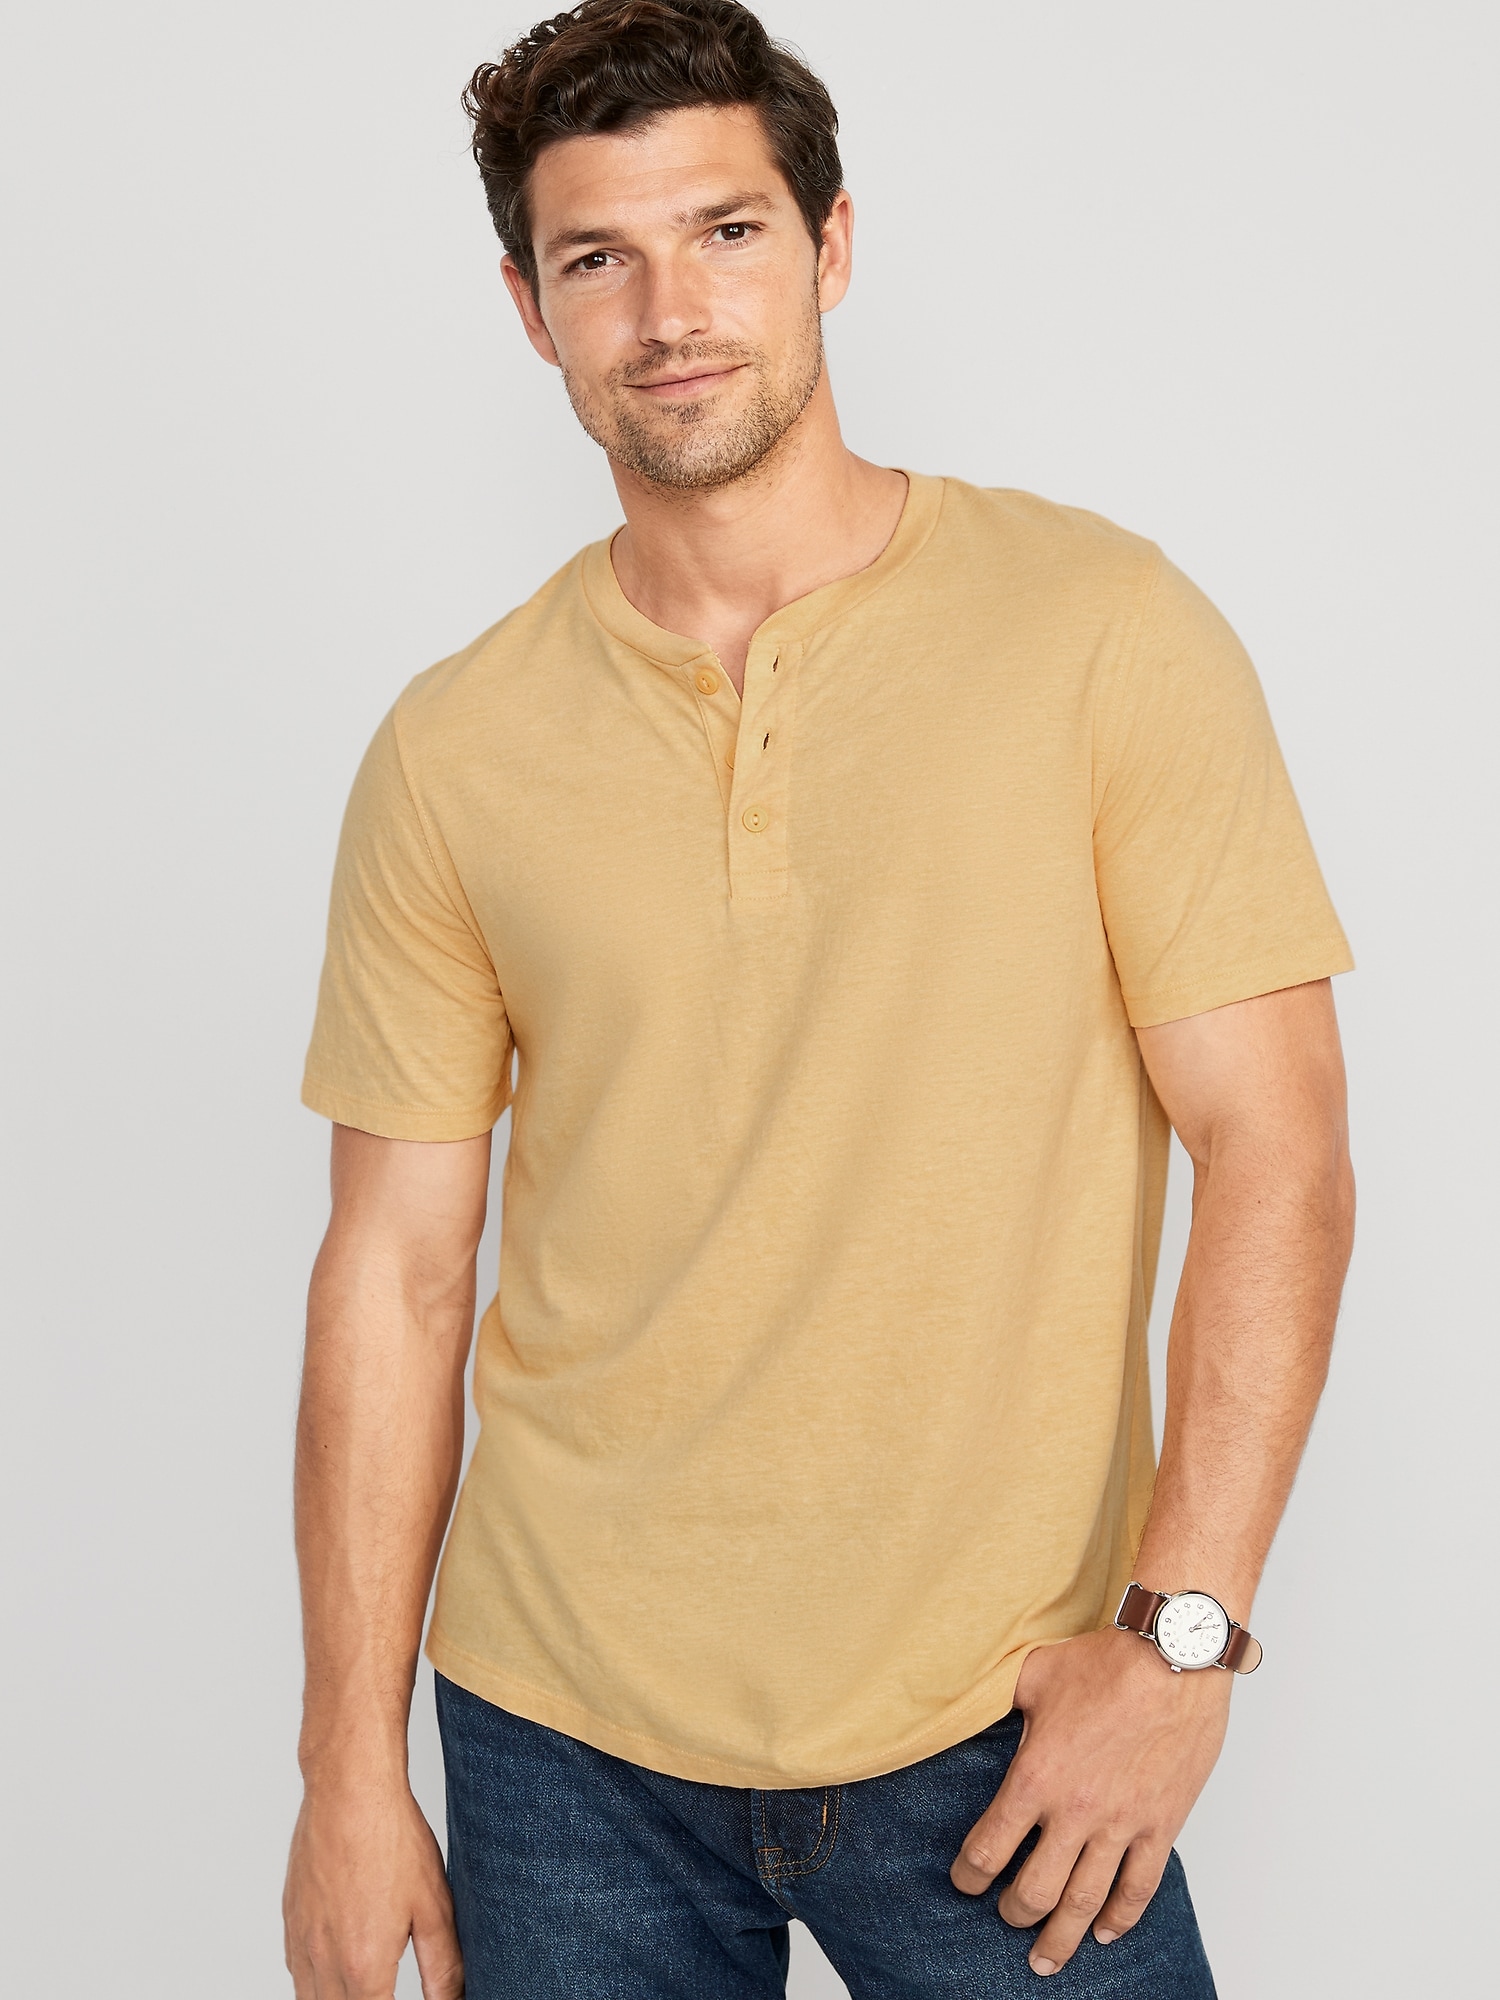 Old Navy Soft-Washed Short-Sleeve Henley T-Shirt yellow. 1